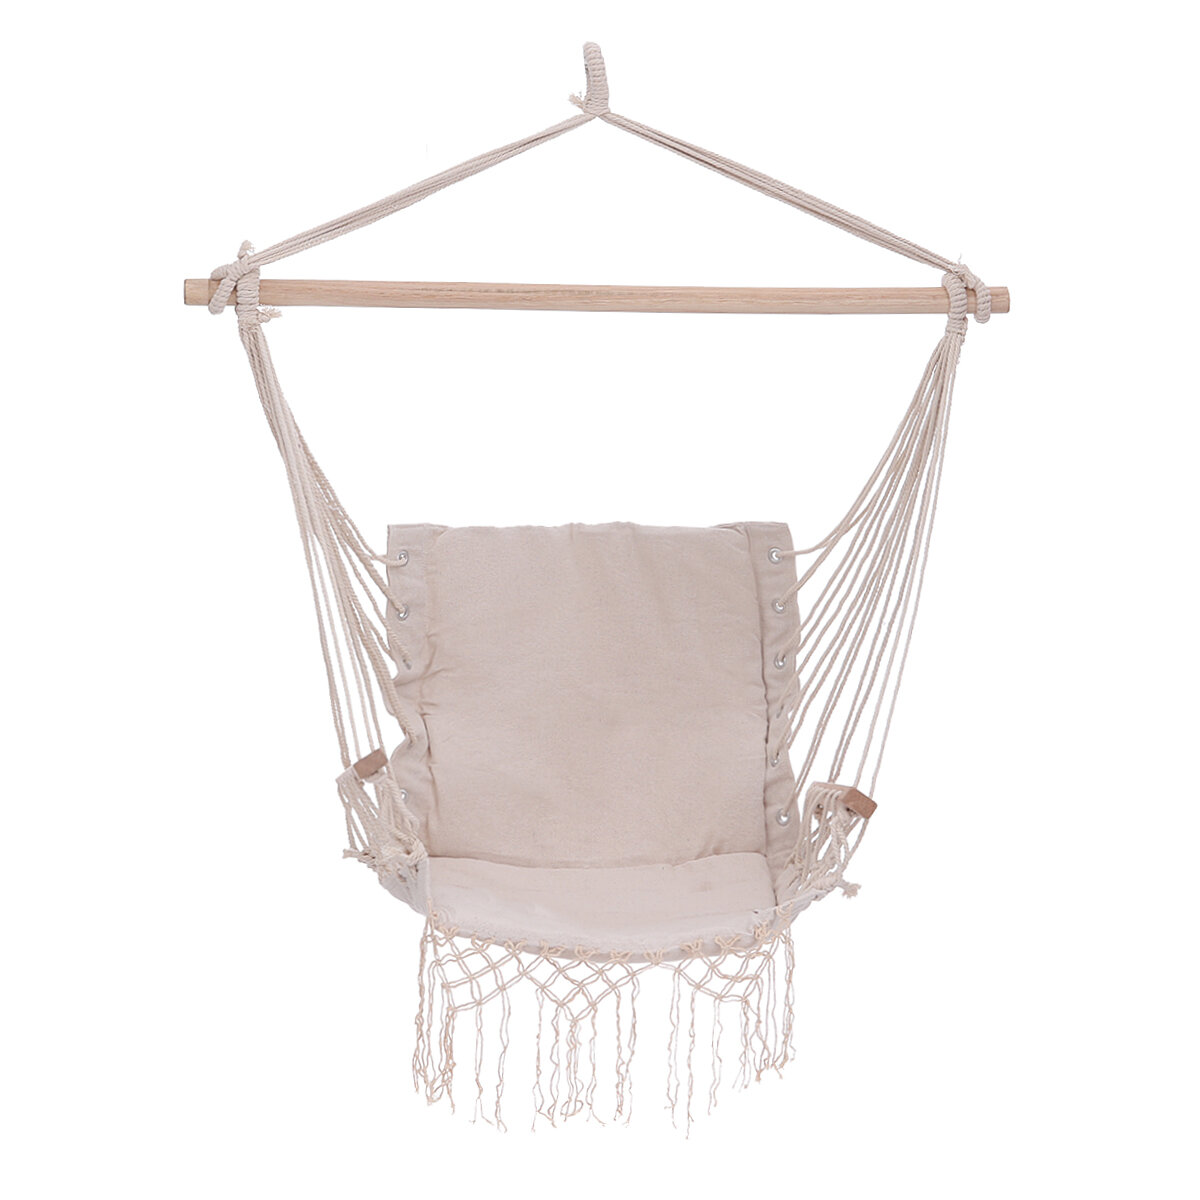 Cotton Hammock Chair Safety Hanging Chair Swinging Max Load 120kg Outdoor Indoor Garden Camping